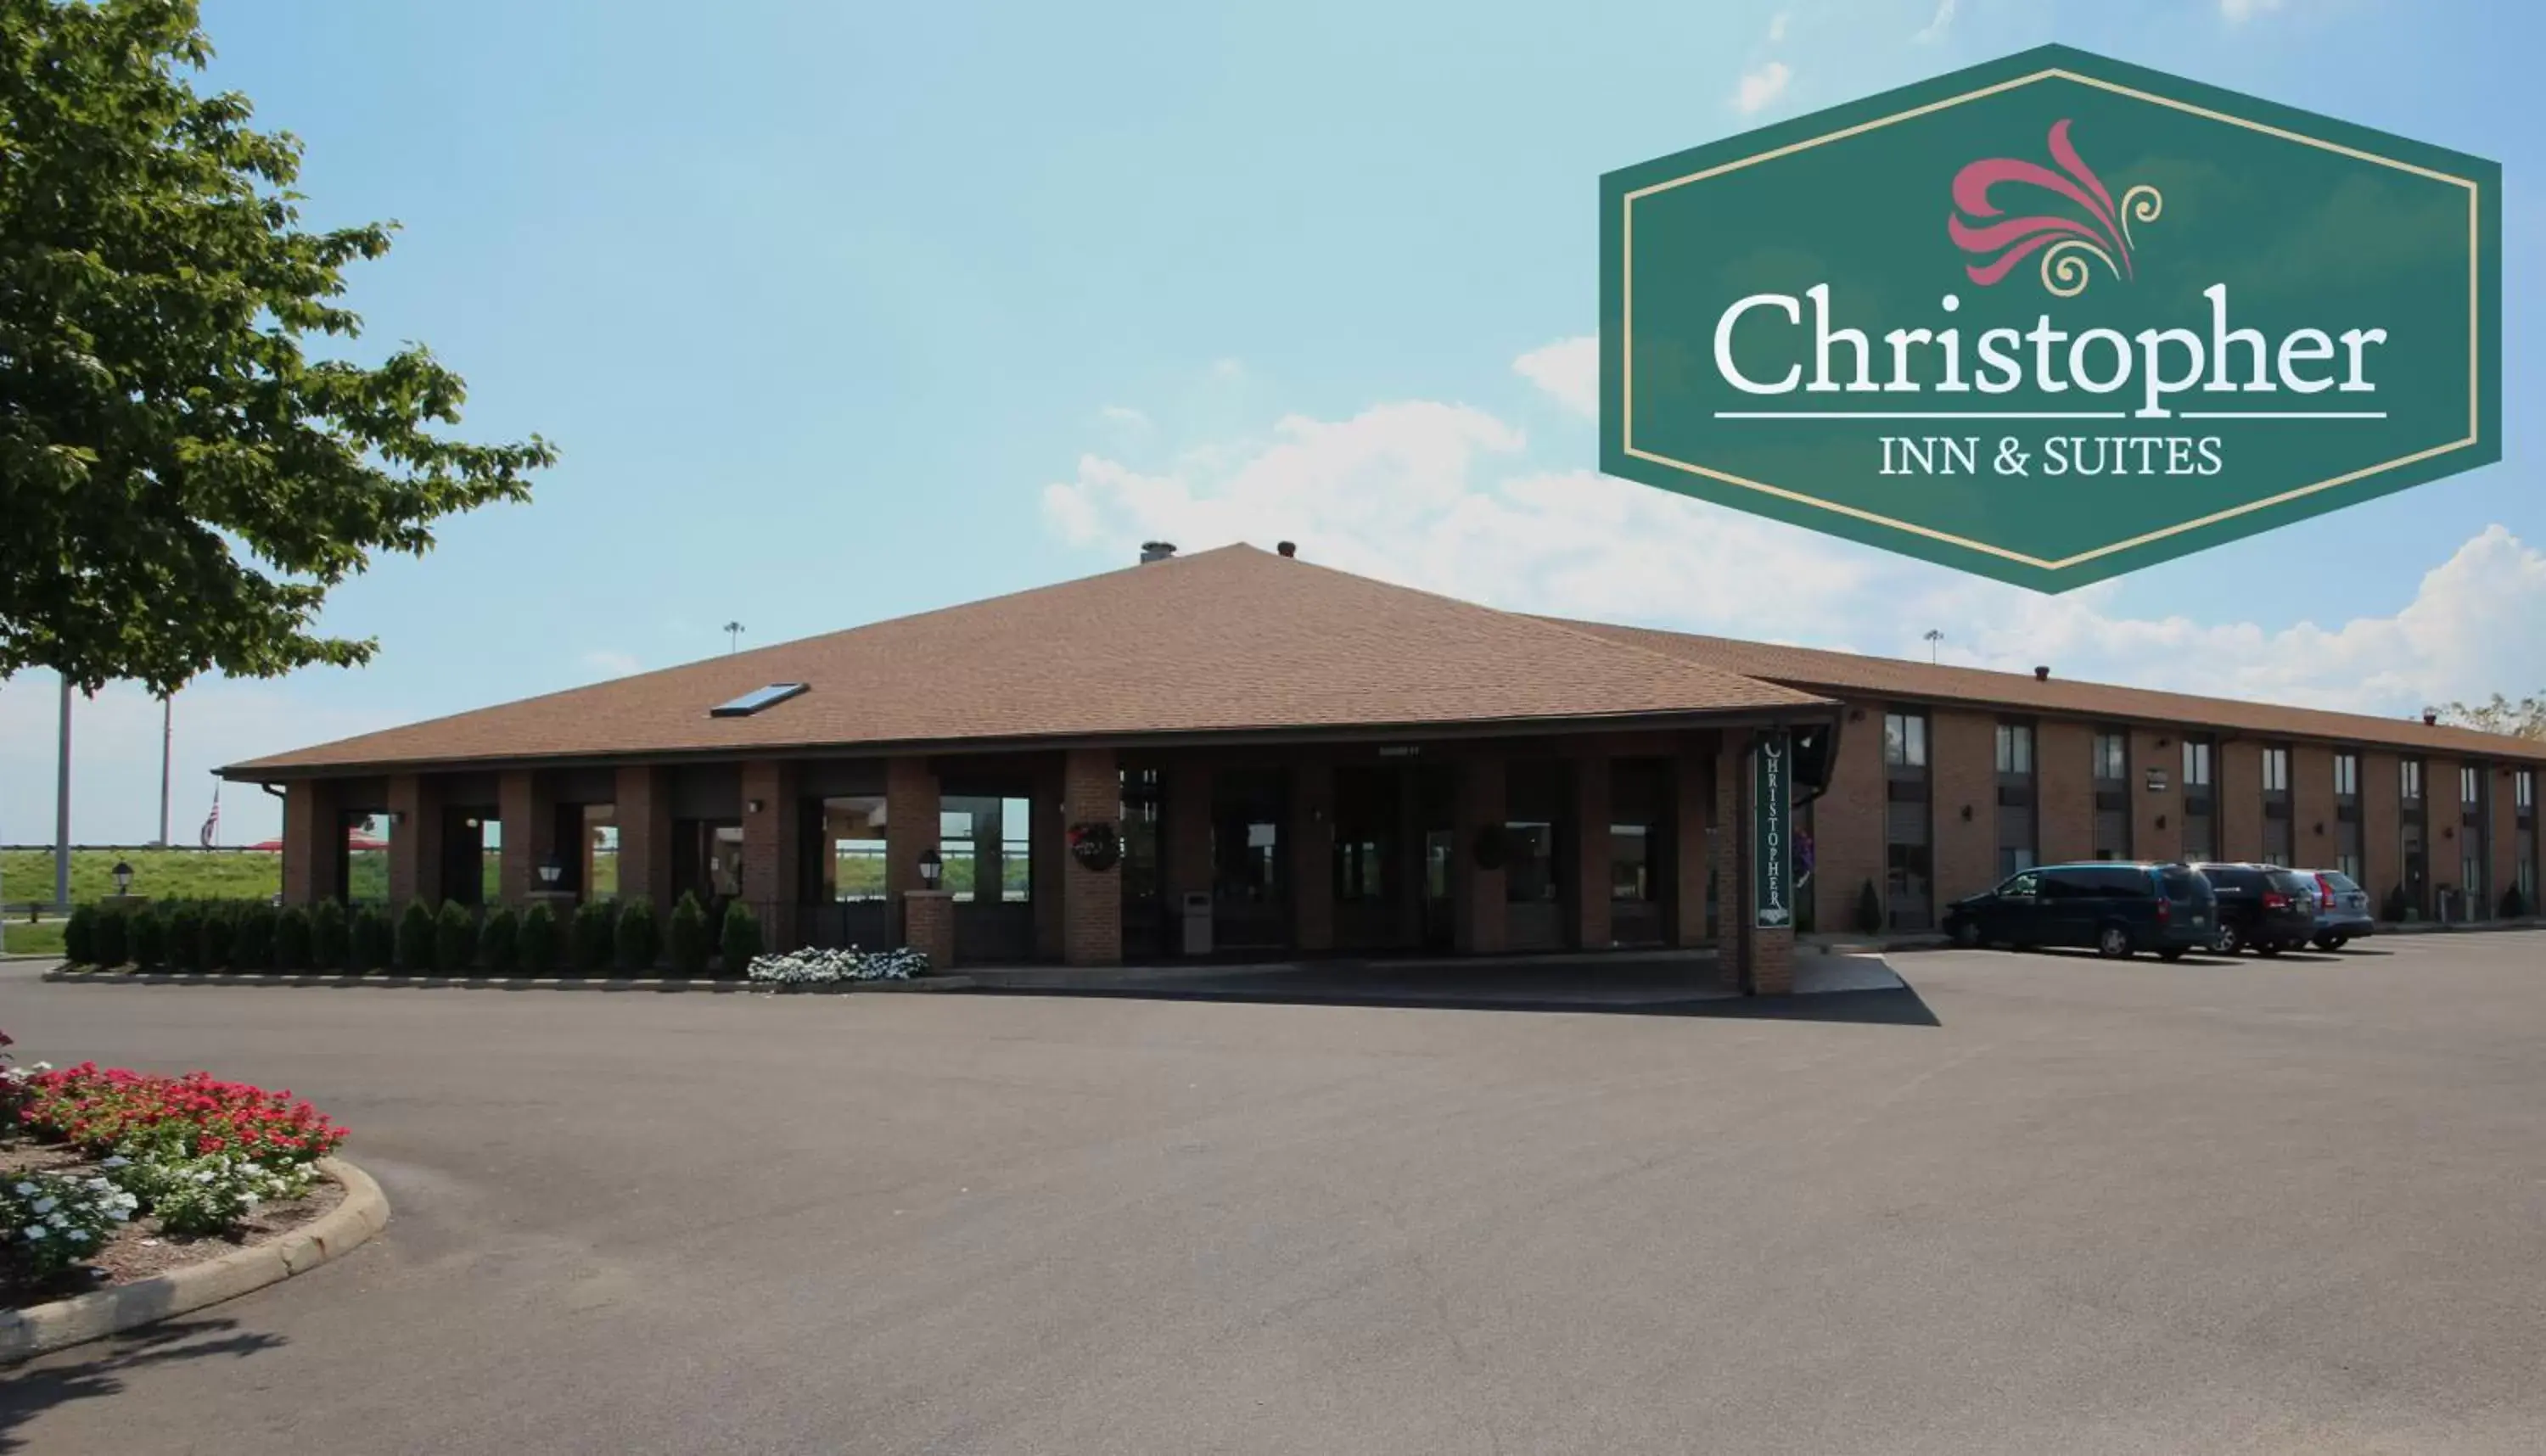 Facade/entrance, Property Building in Christopher Inn and Suites